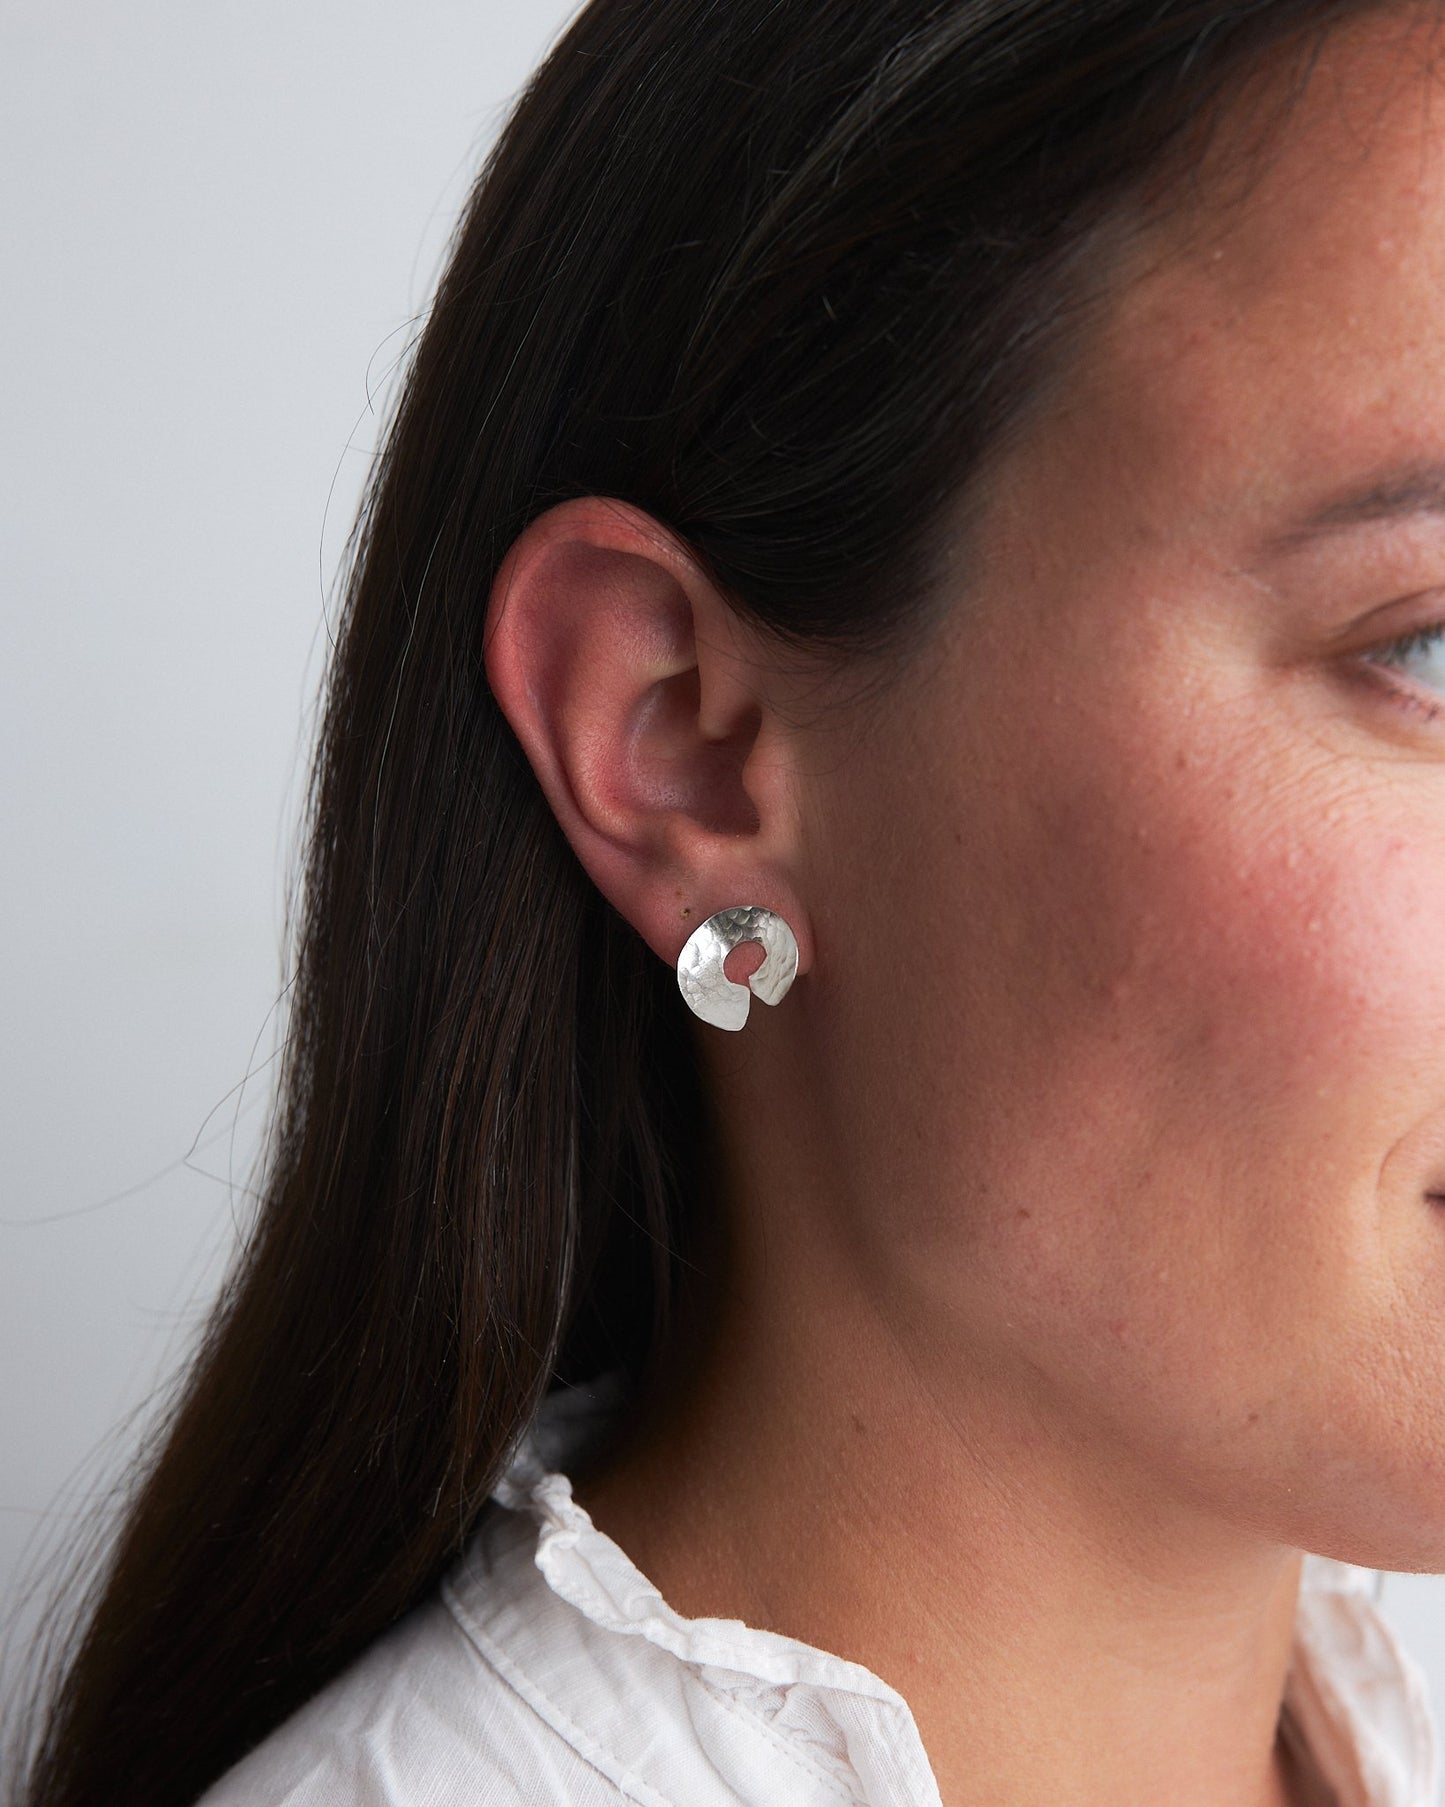 Codium Studs: handmade earrings in recycled silver, based on the shape of the ends of codium seaweed. Worn by a model.